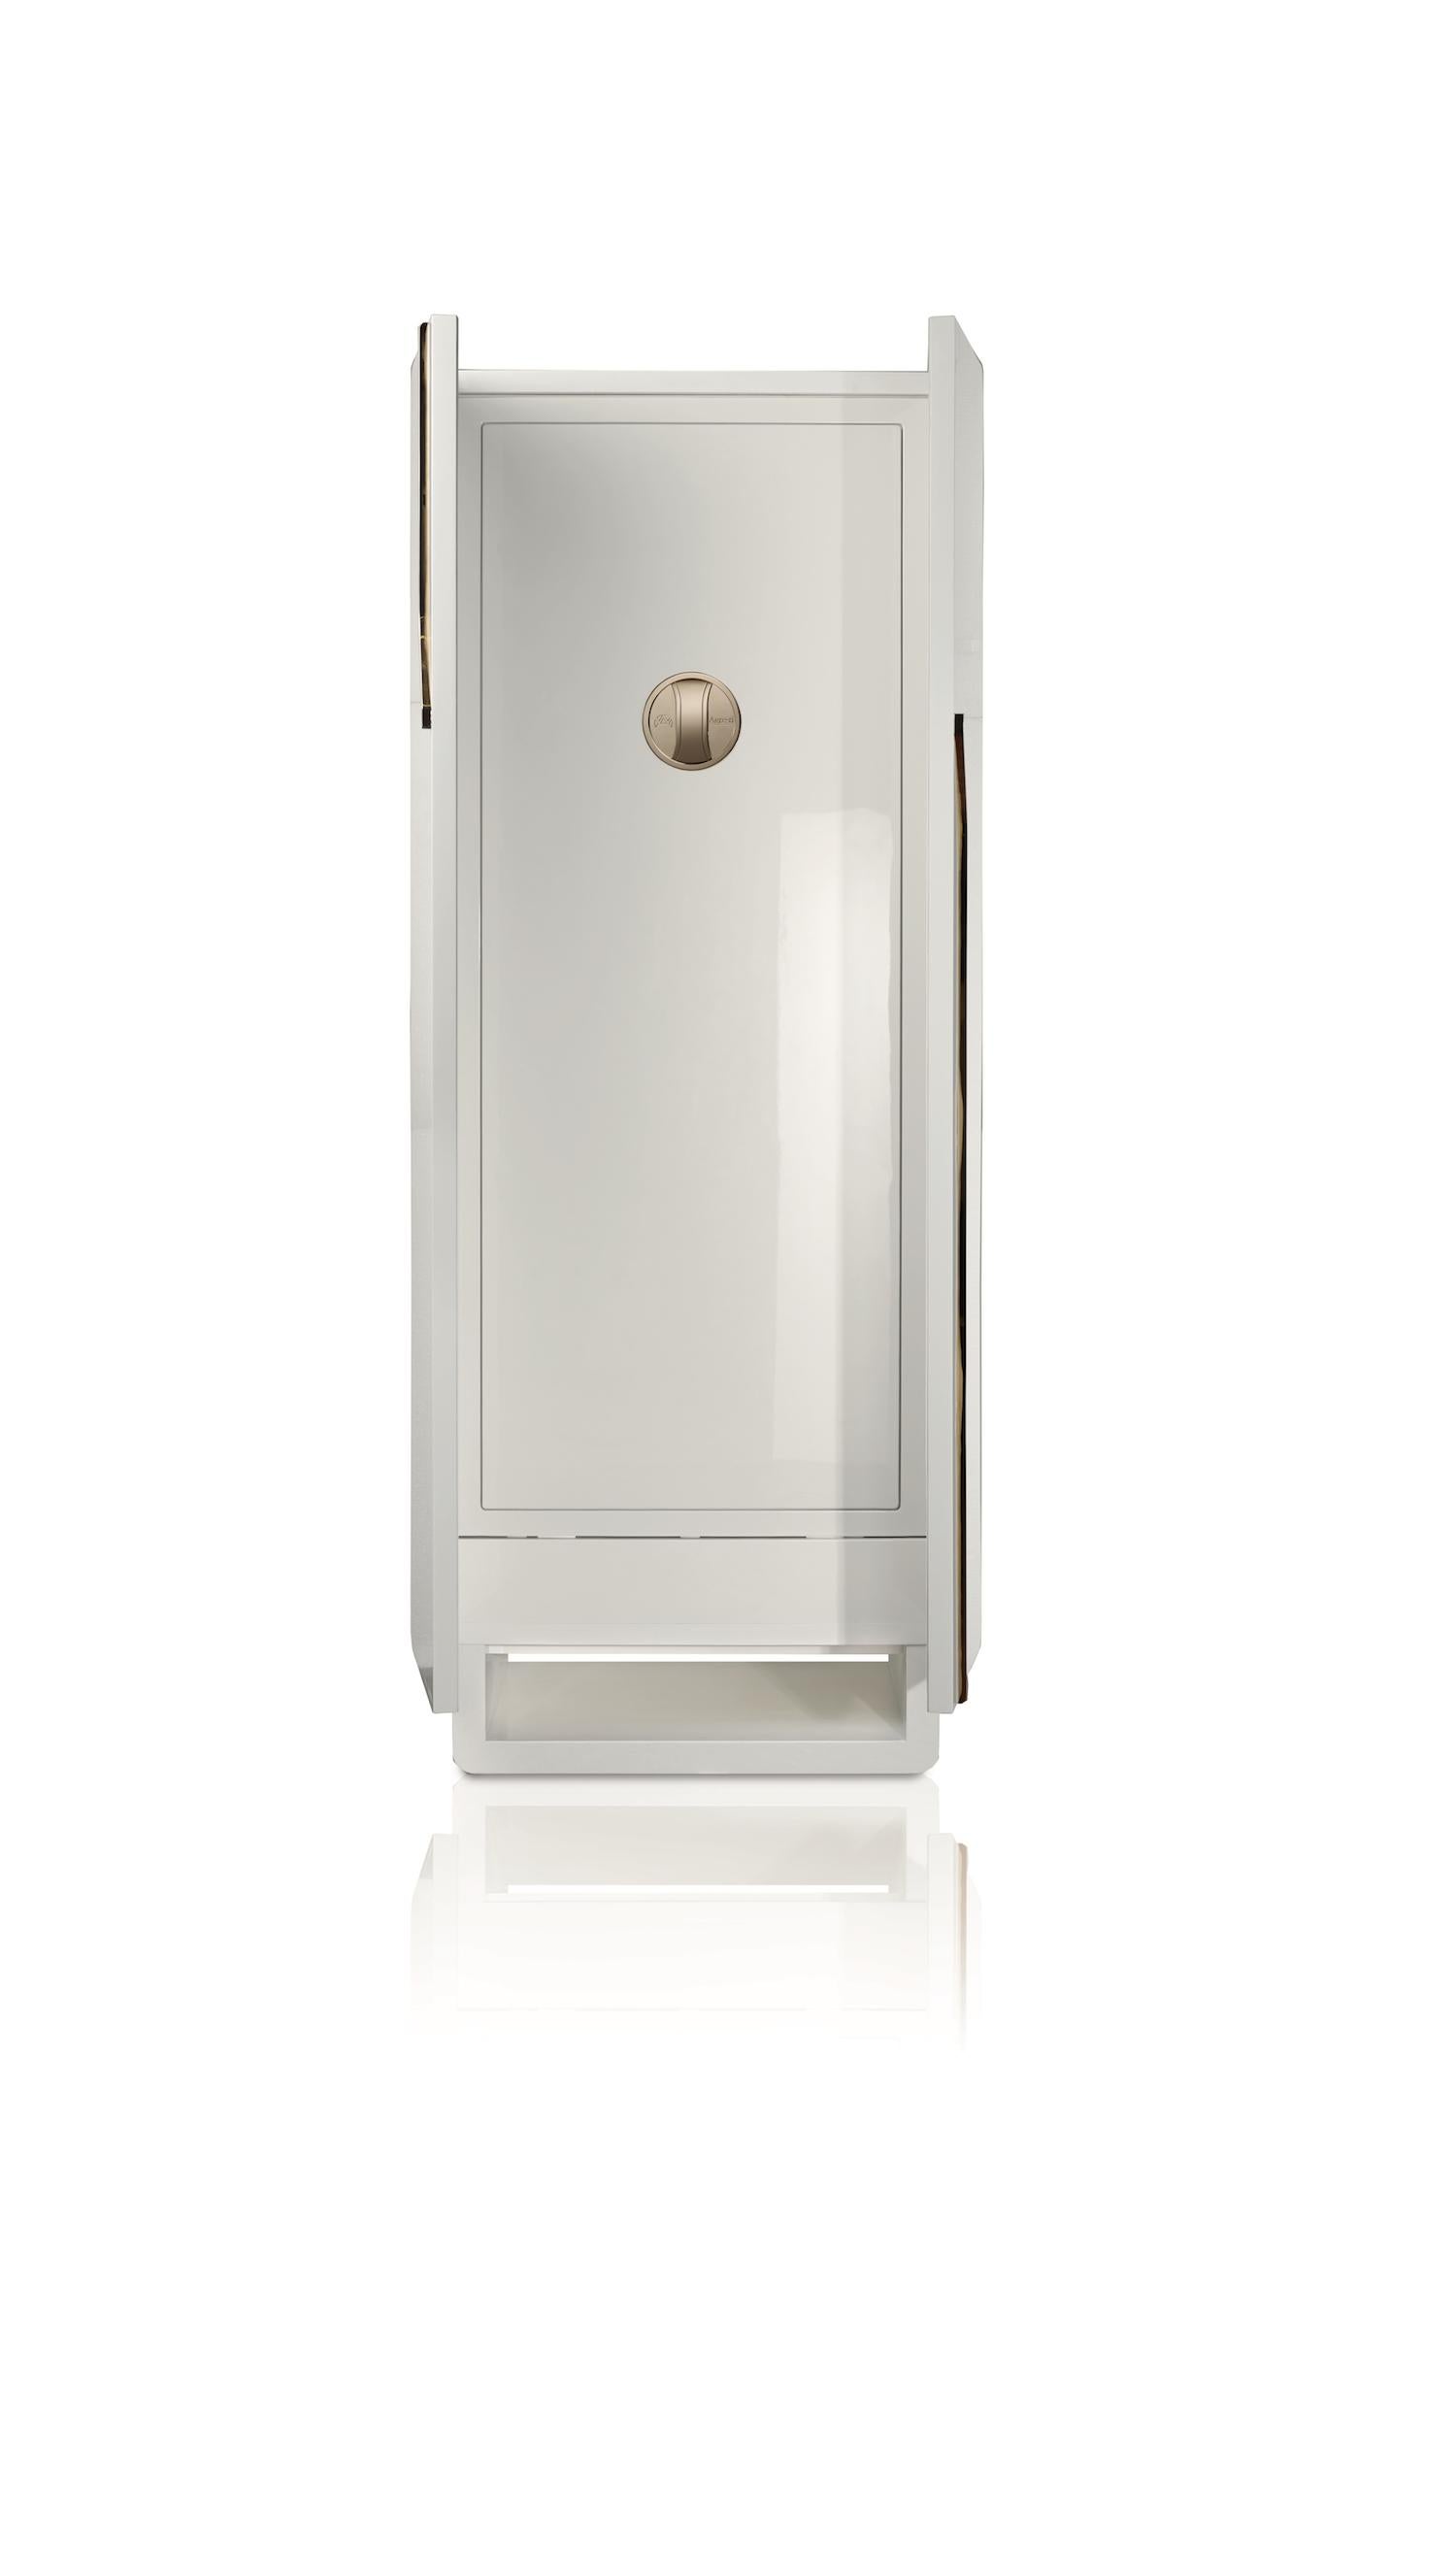 Polished white bird's-eye maple contemporary armored armoire by Agresti.

24-karat gold plated accessories. Round handle with biometric opening device and emergency key integrated. Inside pullout / pull-out necklace holder and drawers lined for